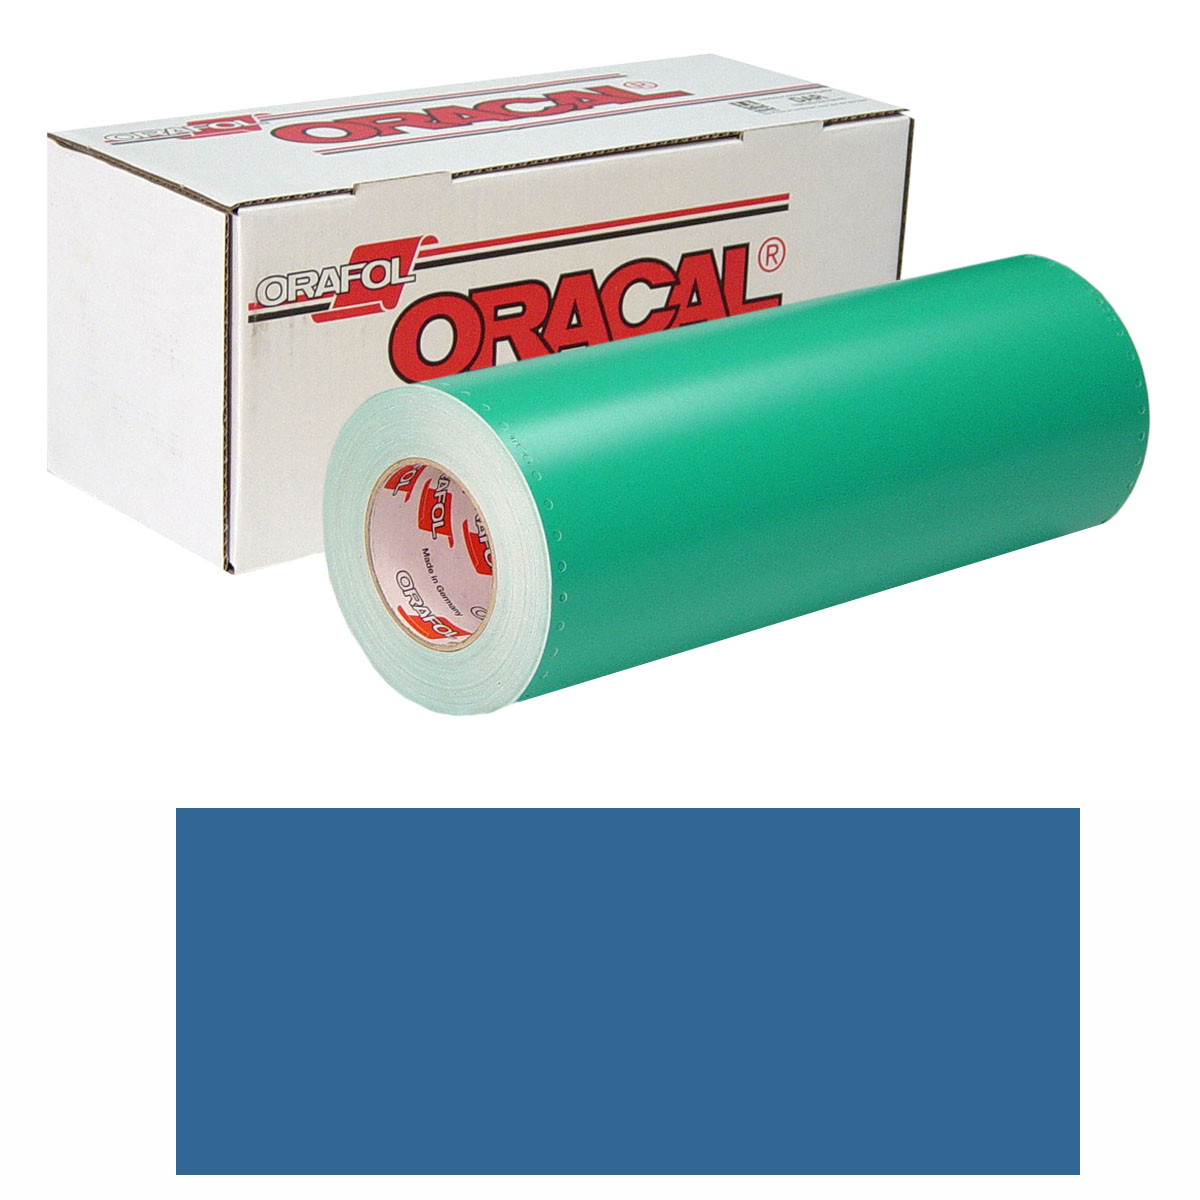 ORACAL 8500 30in X 50yd 066 Turquois Blue